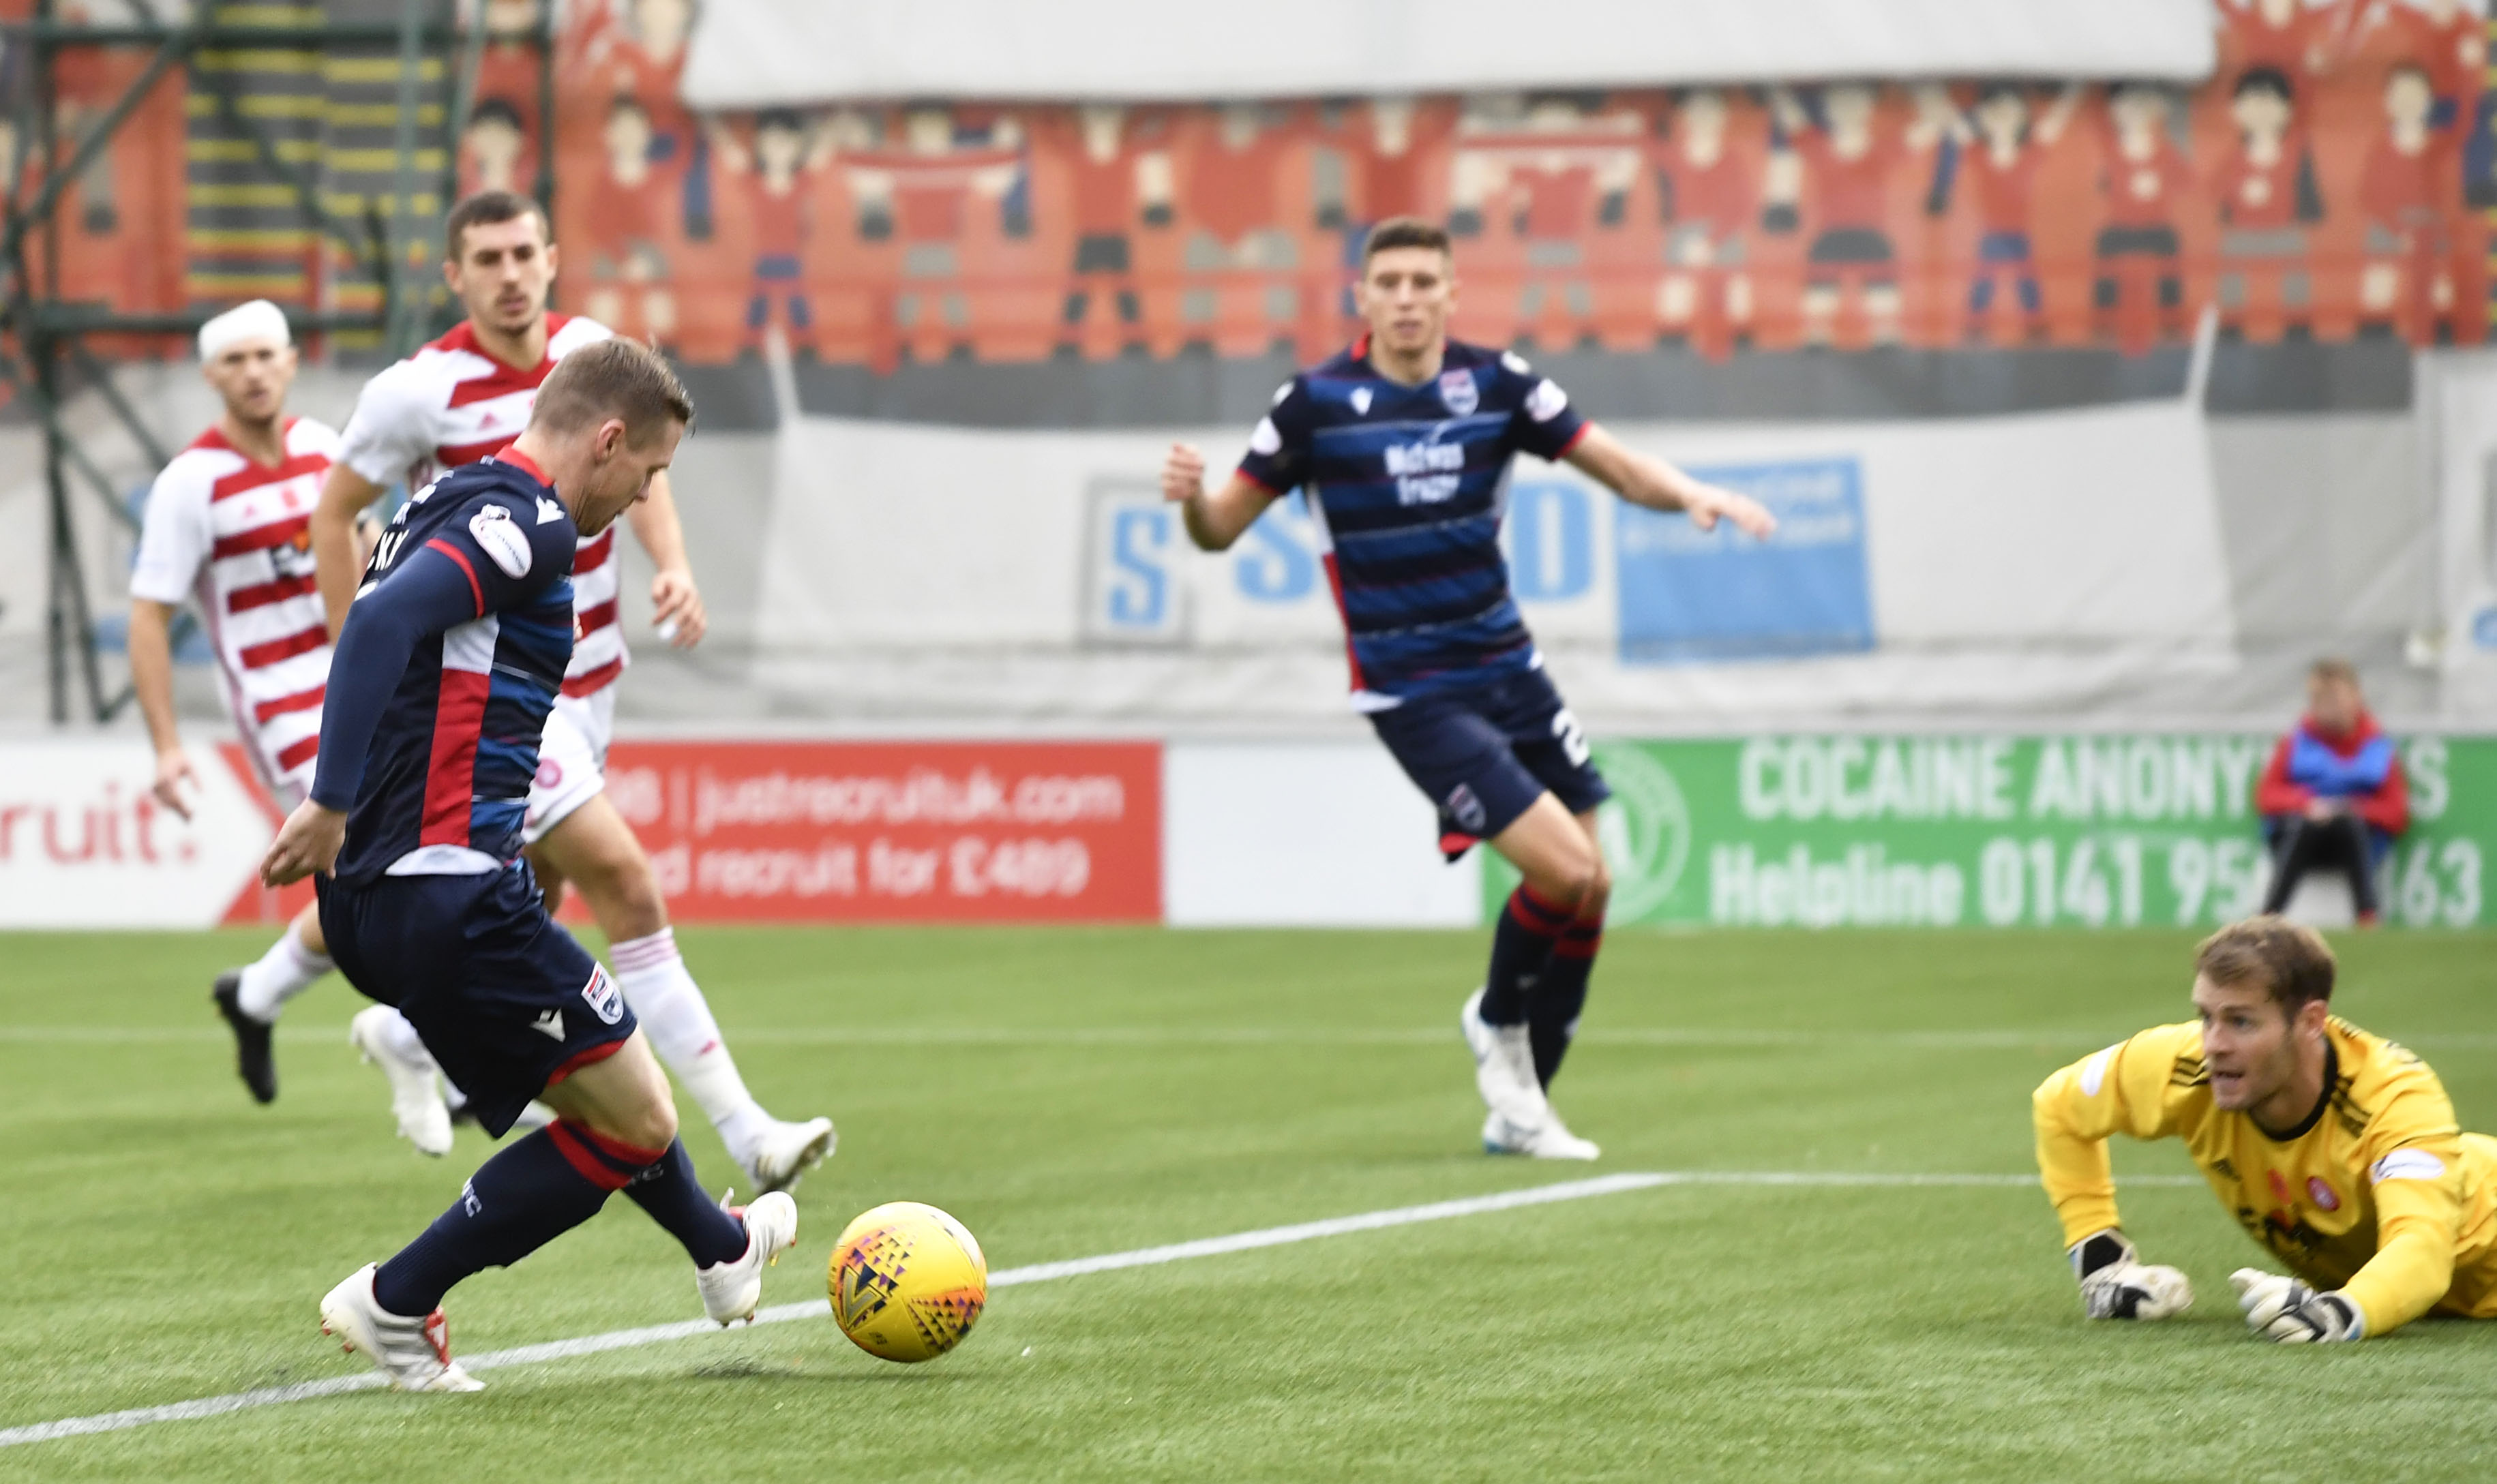 Ross County's Billy McKay scores the opening goal during the Ladbrokes Premiership match between Hamilton and Ross County.